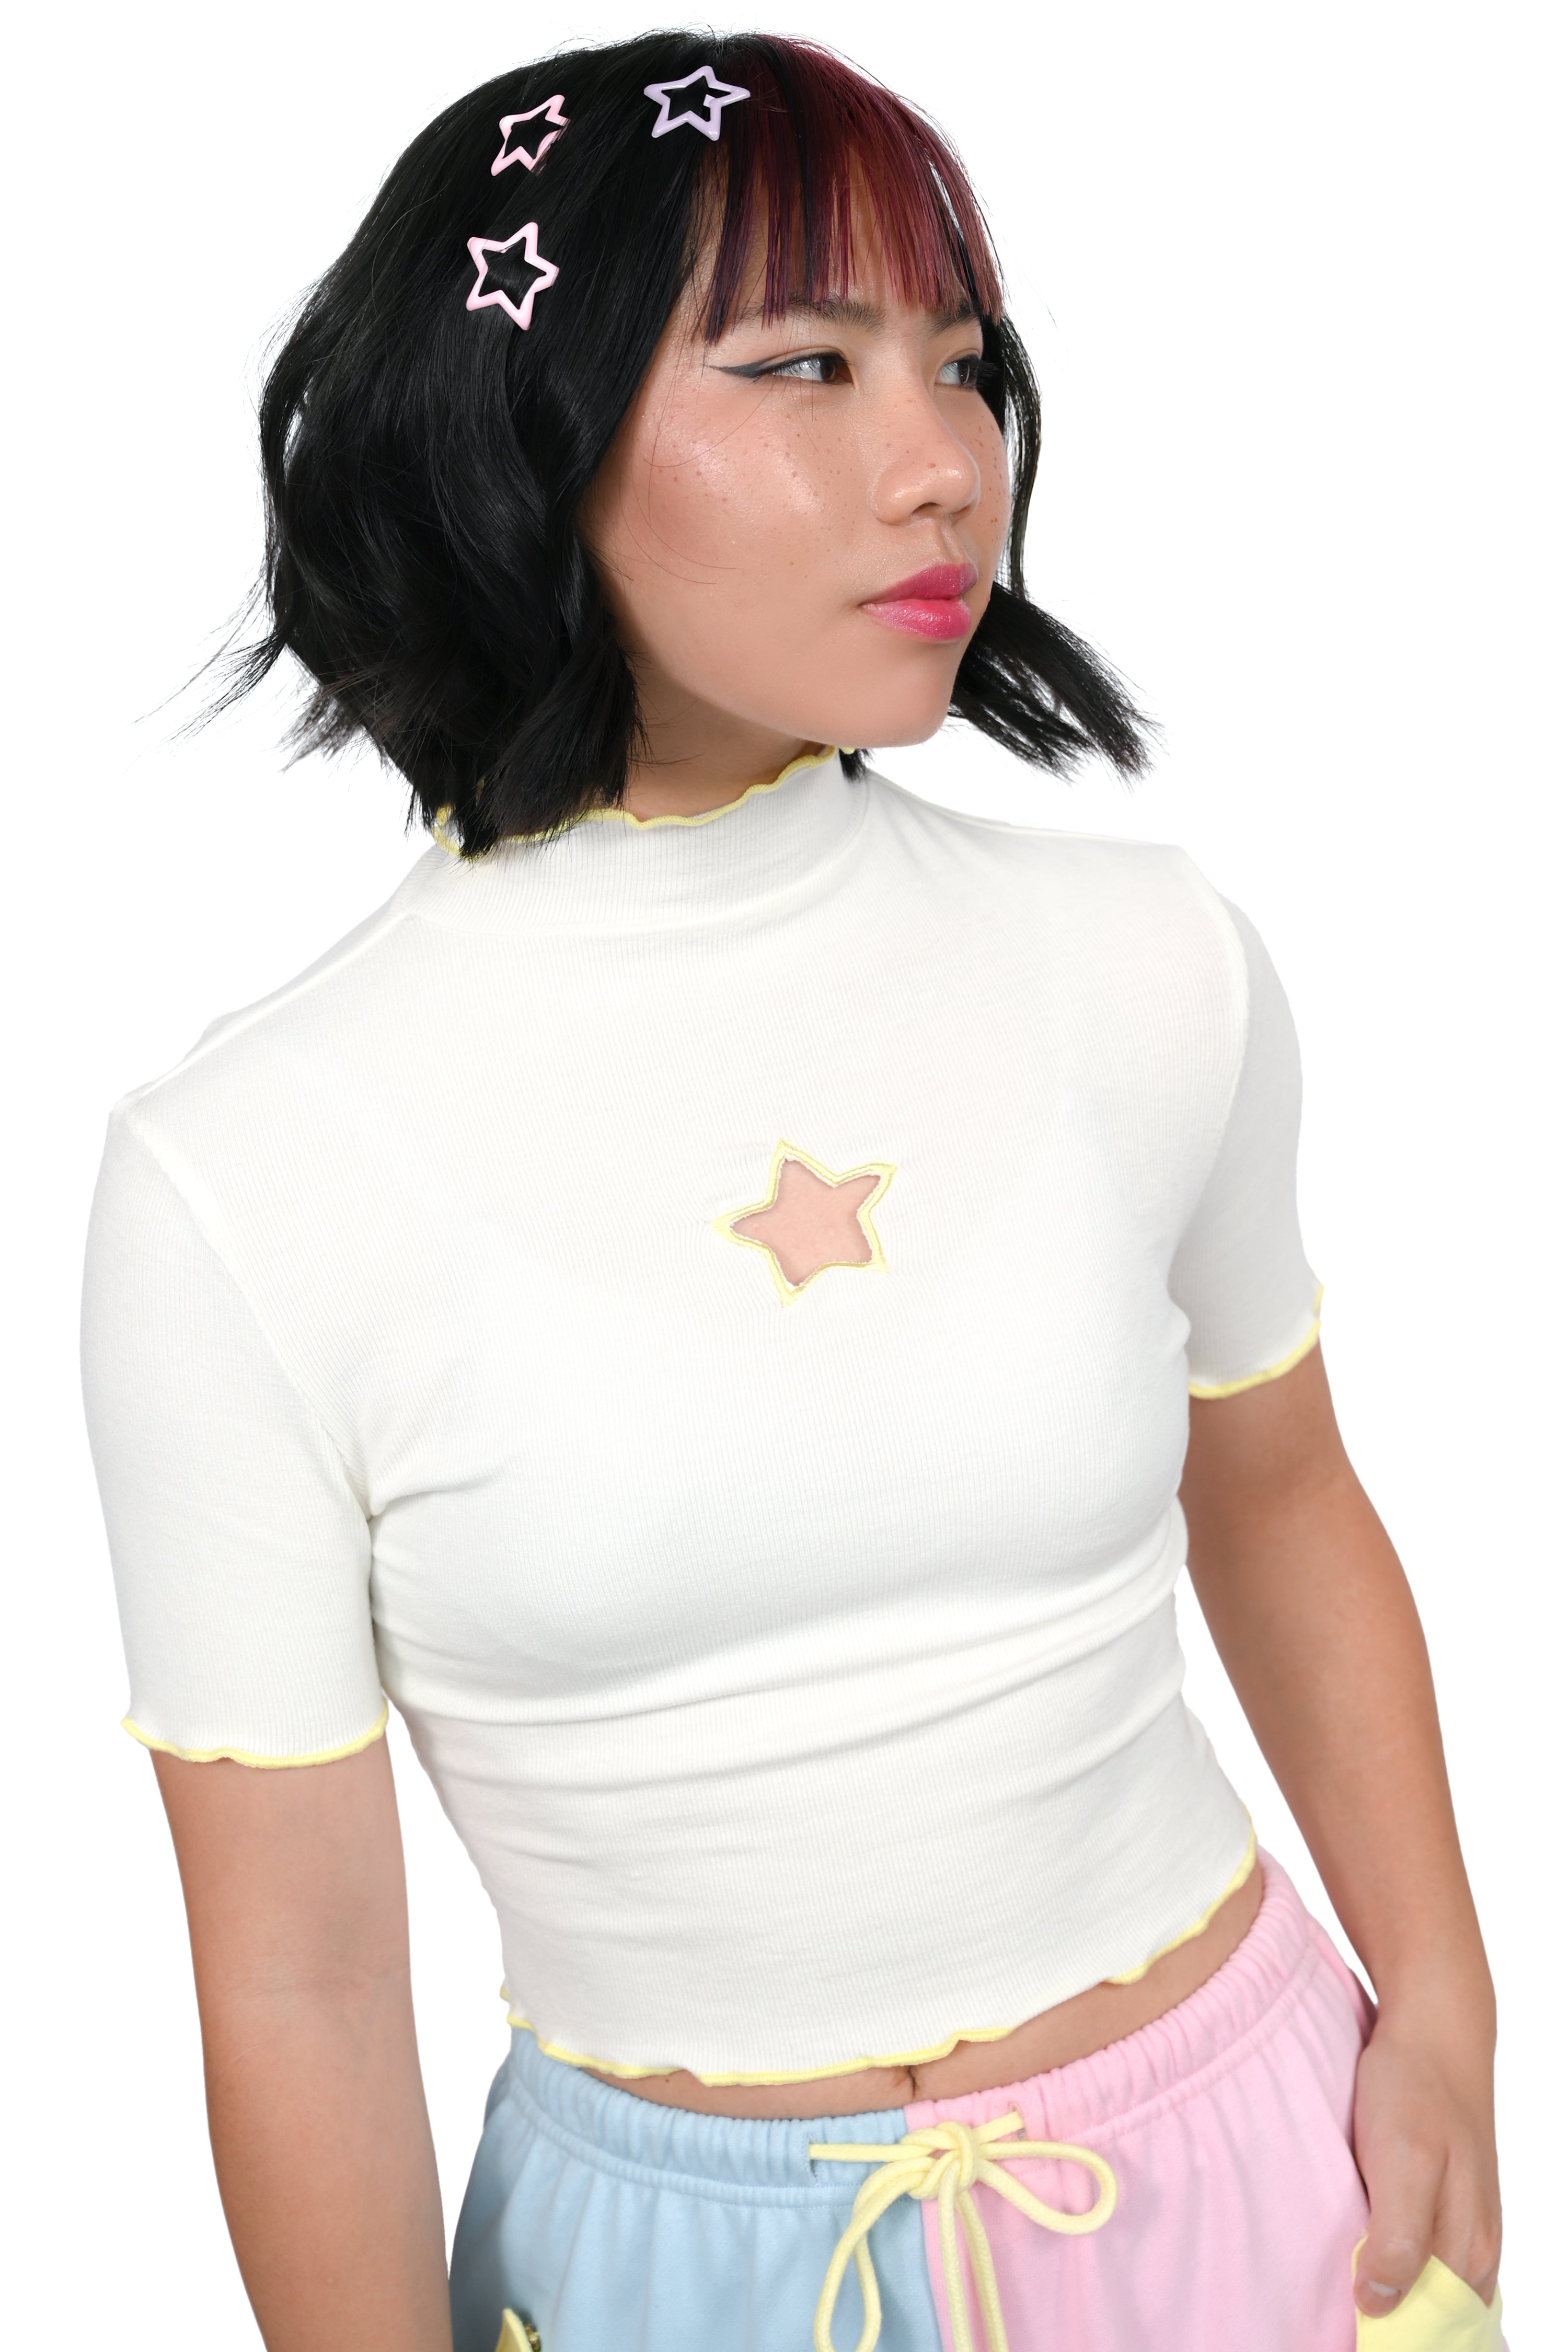 Star Cut Out Crop top - XL & 3X left! Sign up for restock!